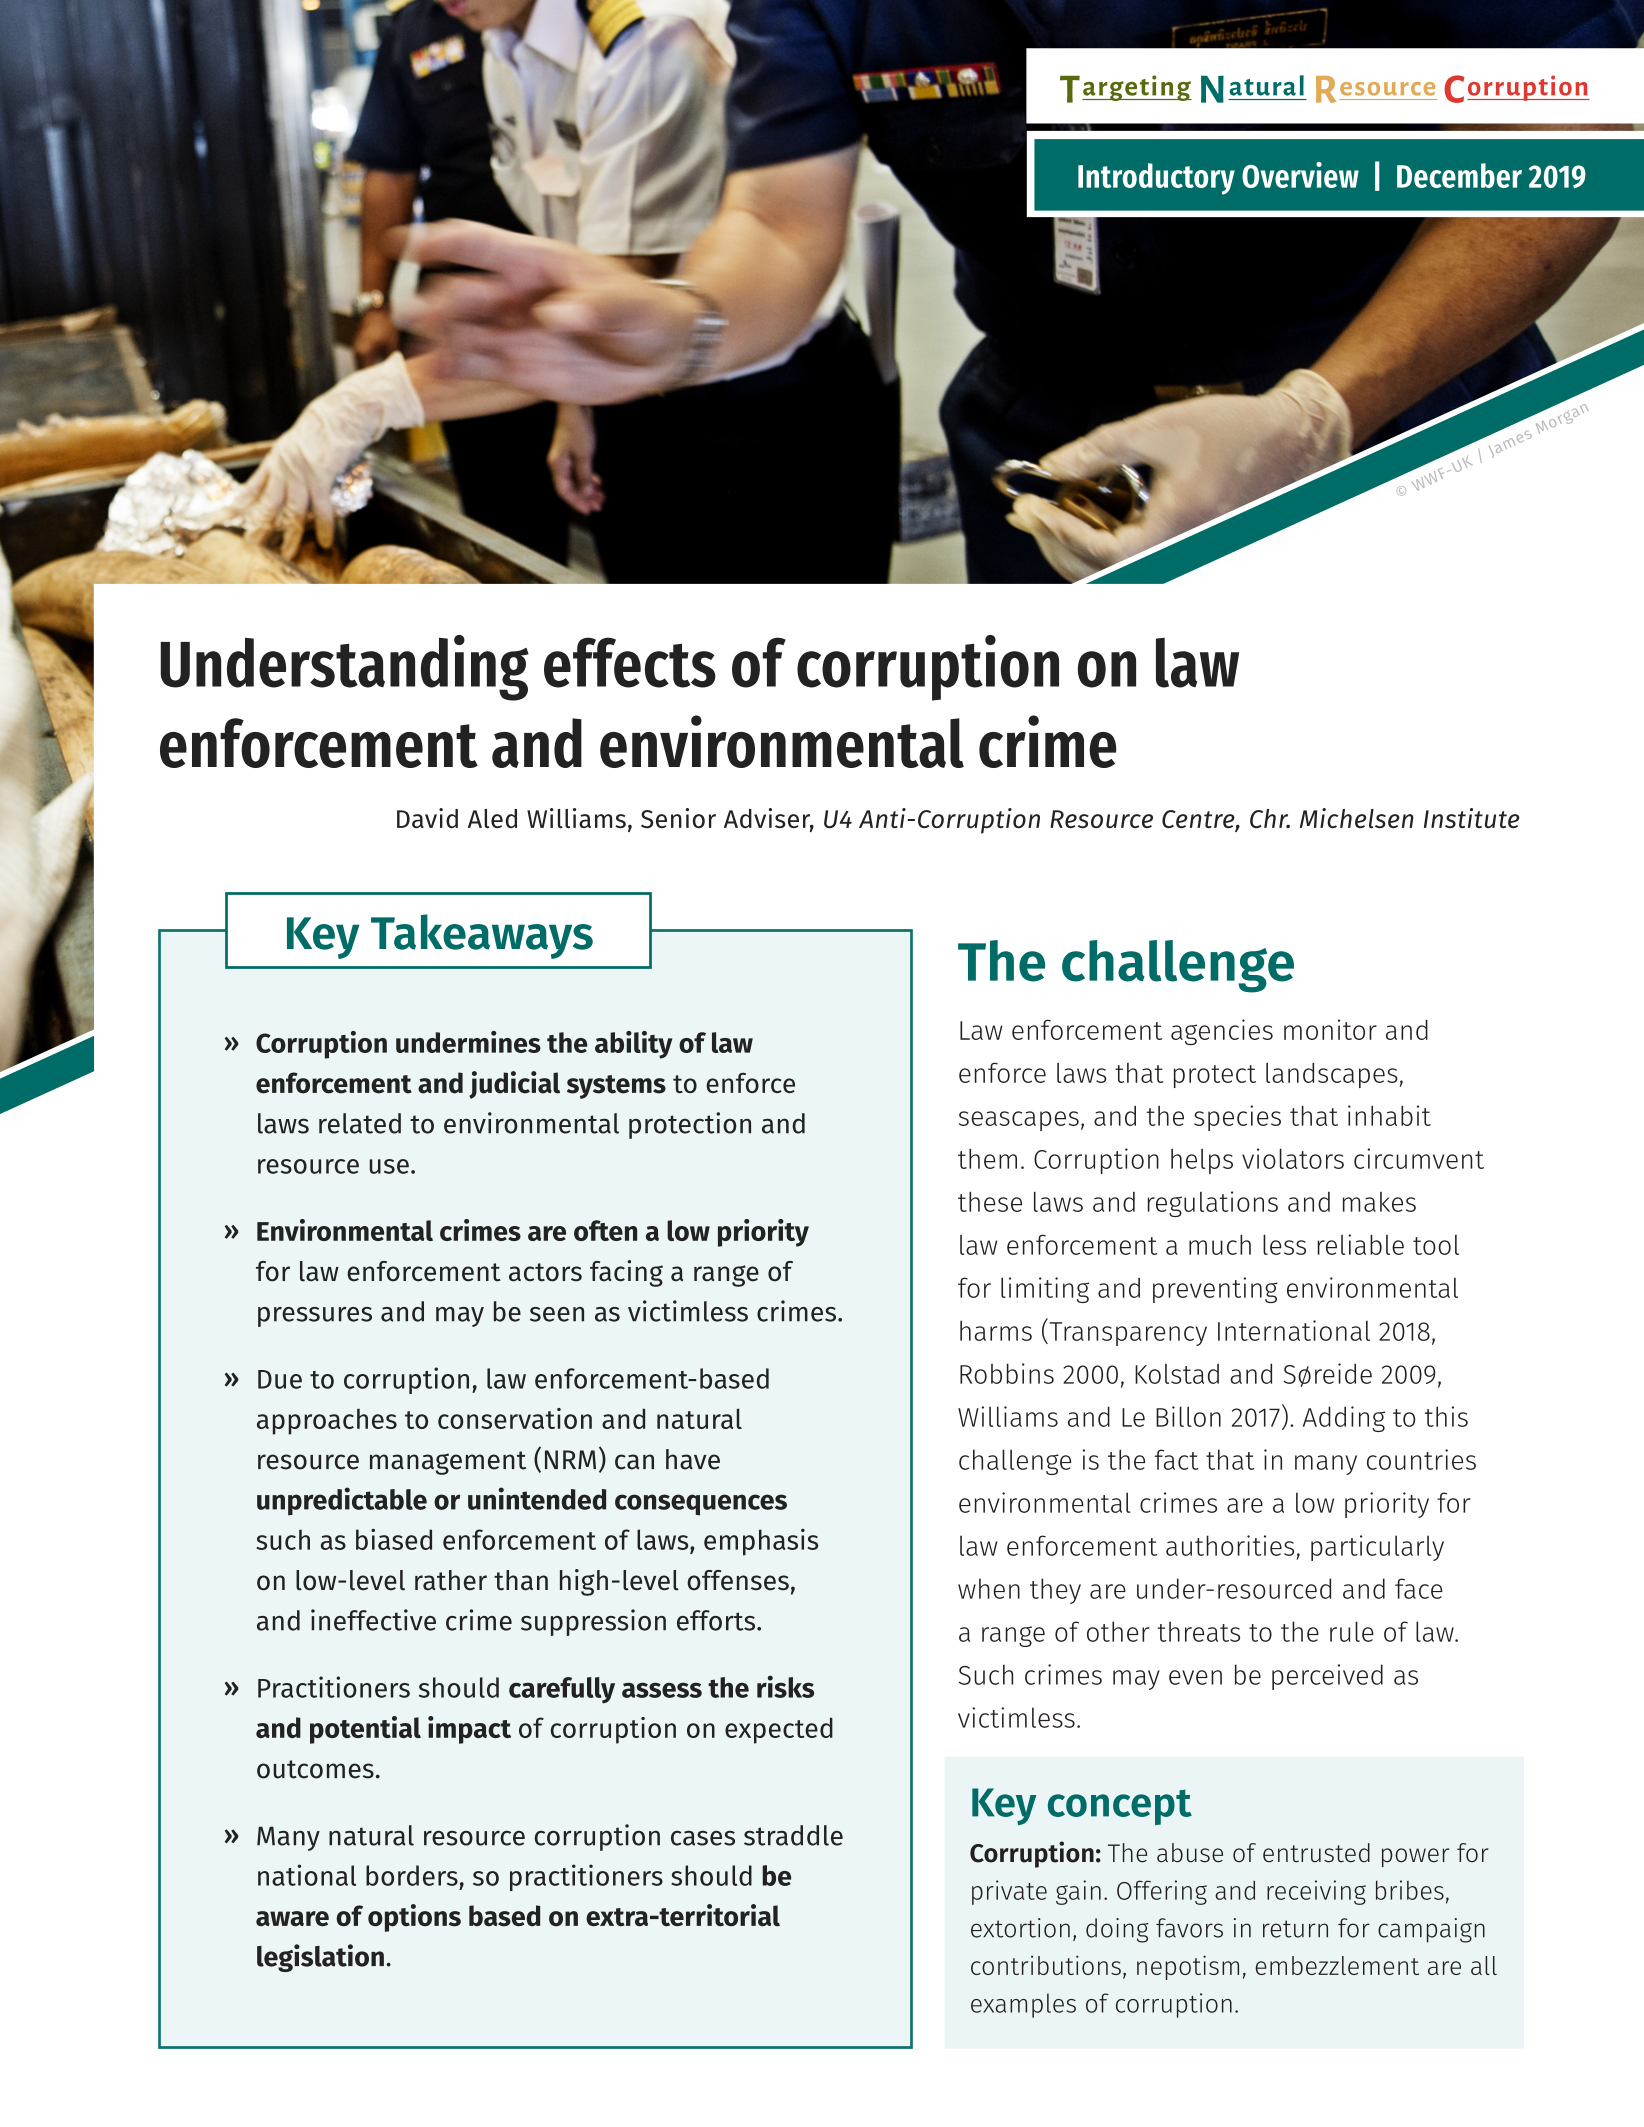 Understanding effects of corruption on law enforcement and environmental crime